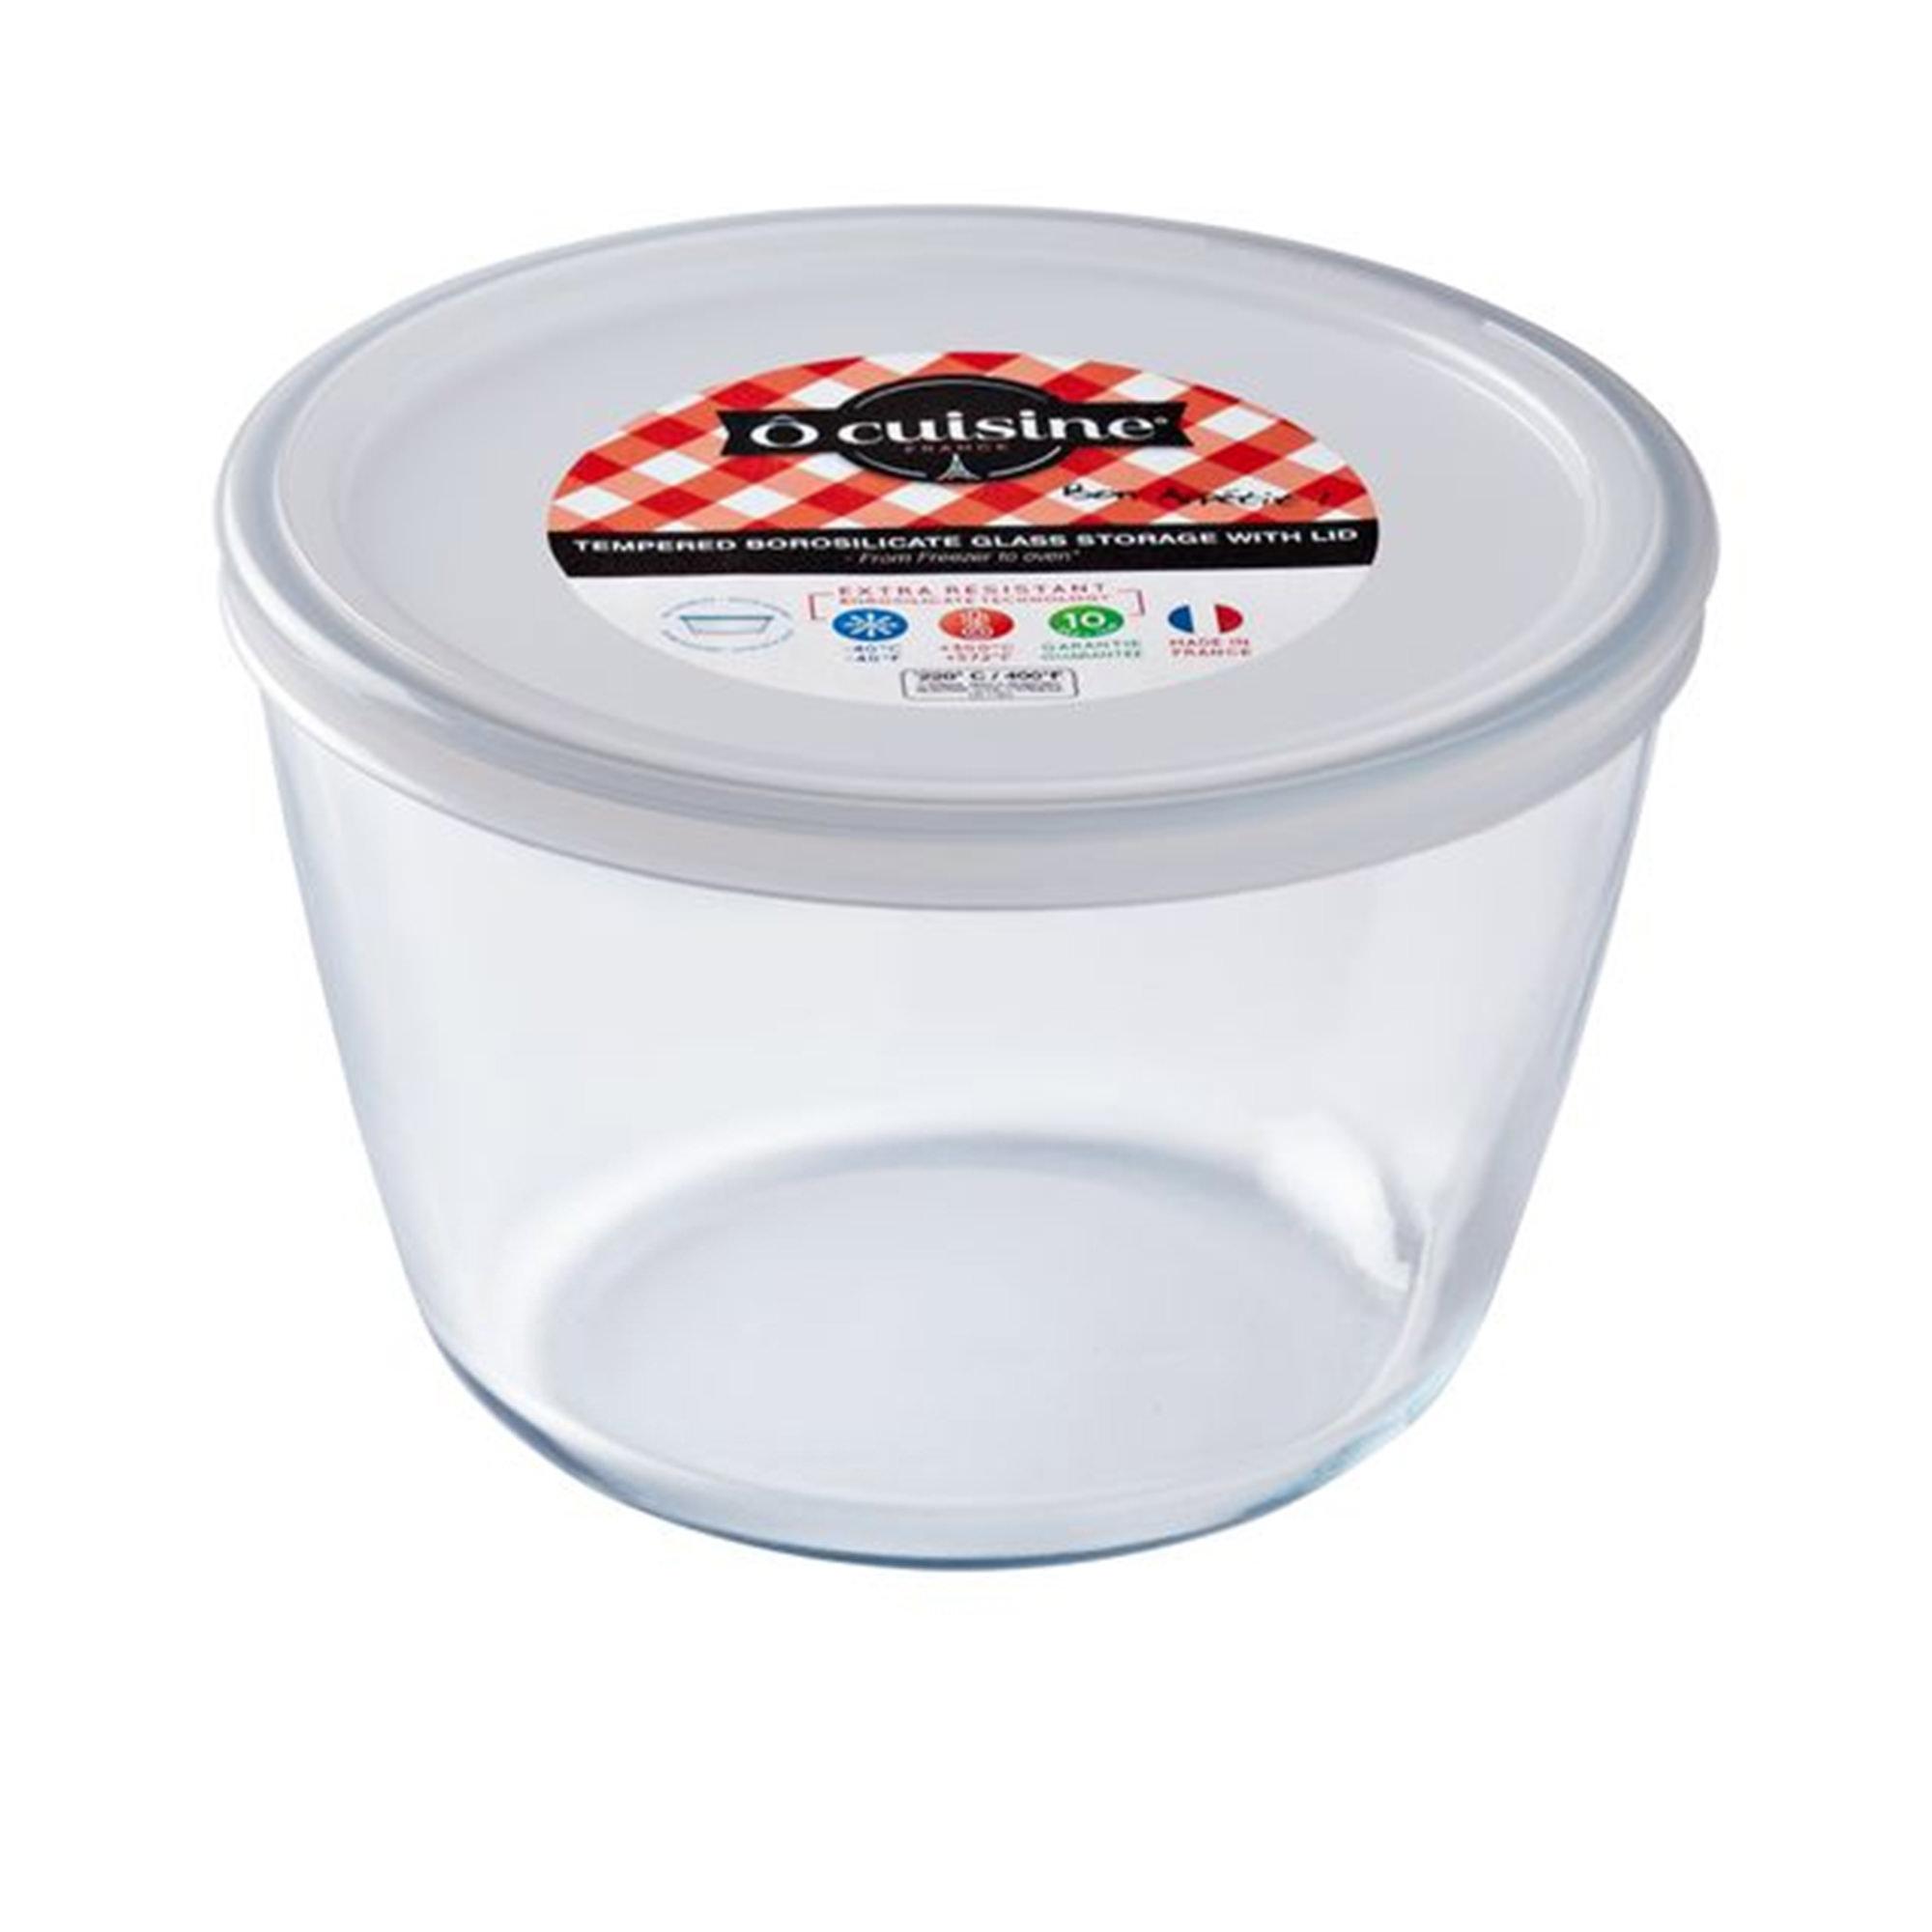 O' Cuisine Round Glass Food Storage Container 1.6L Image 6